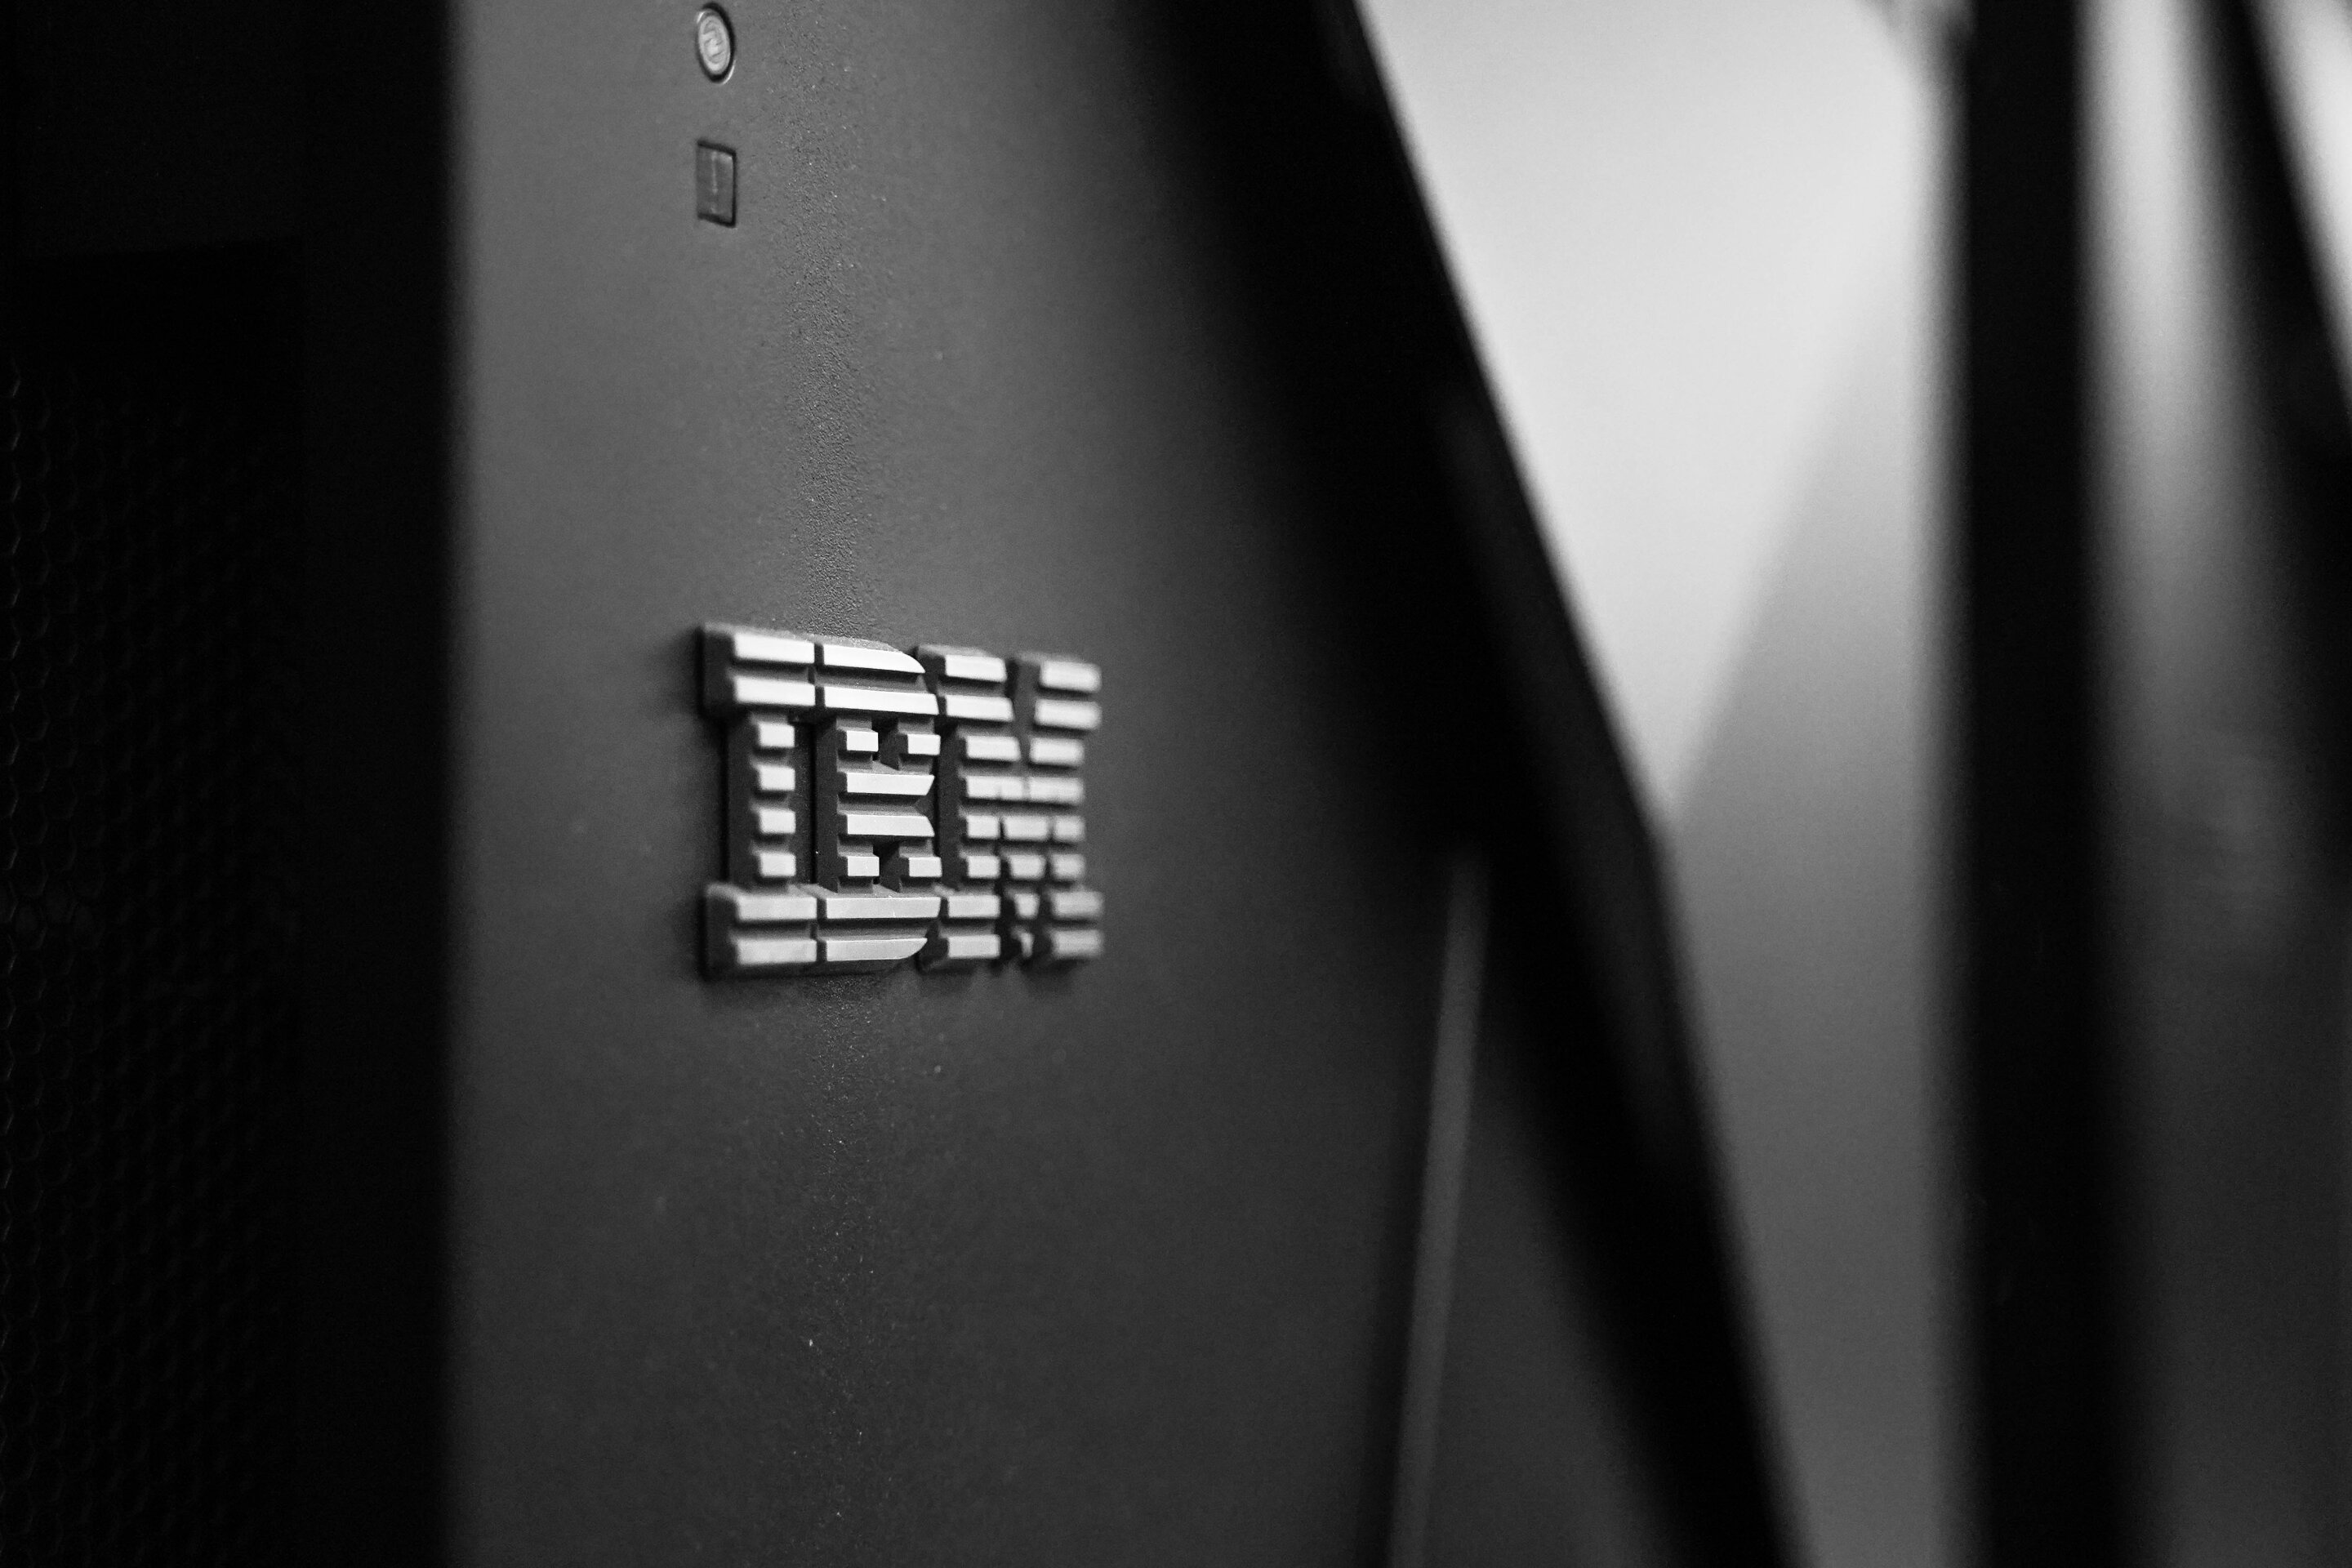 IBM to pause hiring for jobs that AI could do